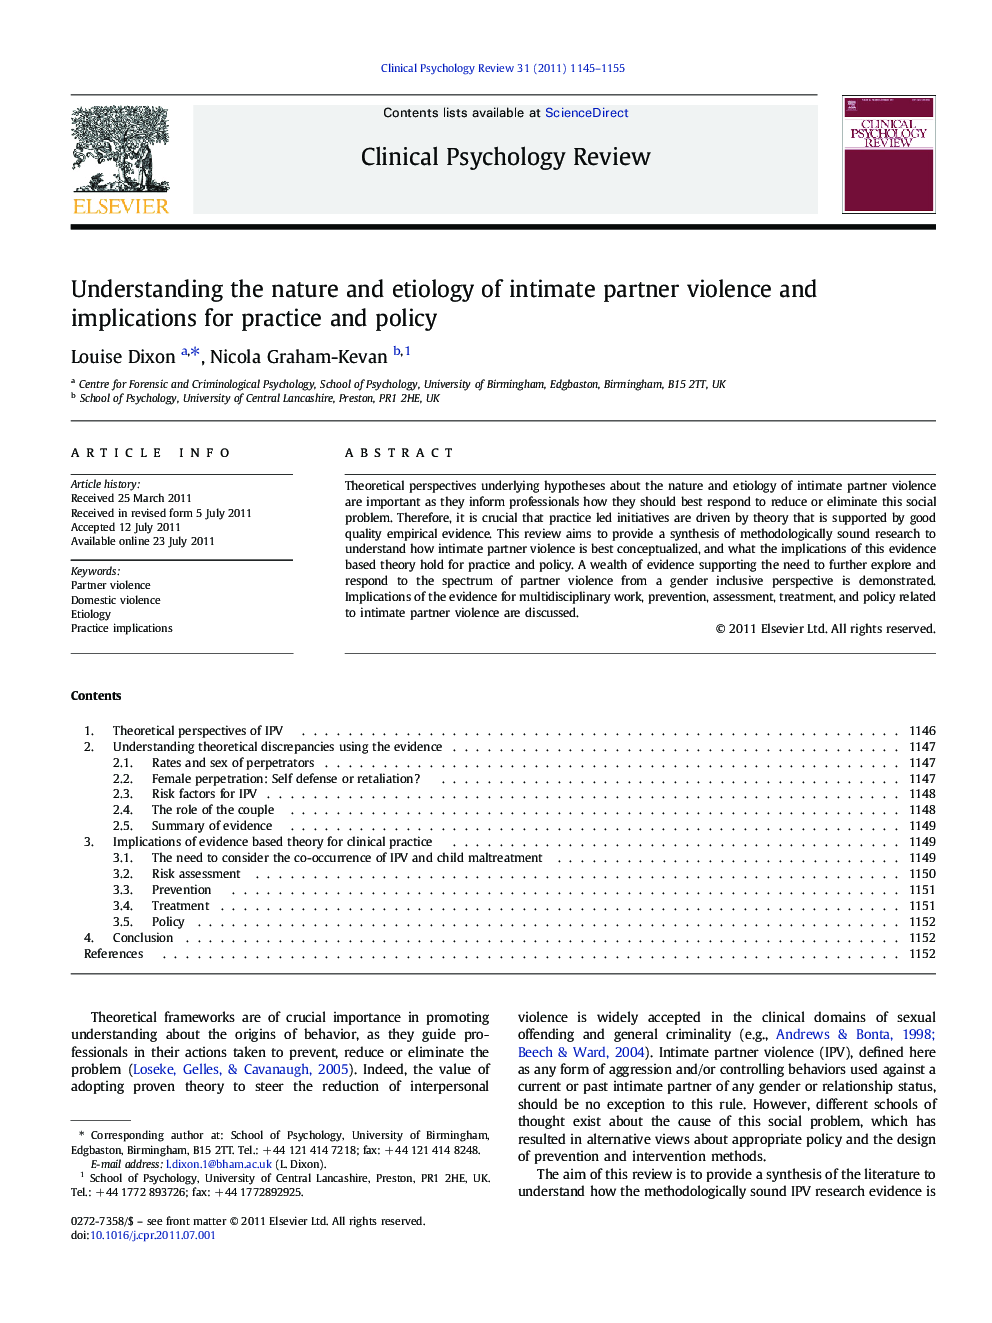 Understanding the nature and etiology of intimate partner violence and implications for practice and policy